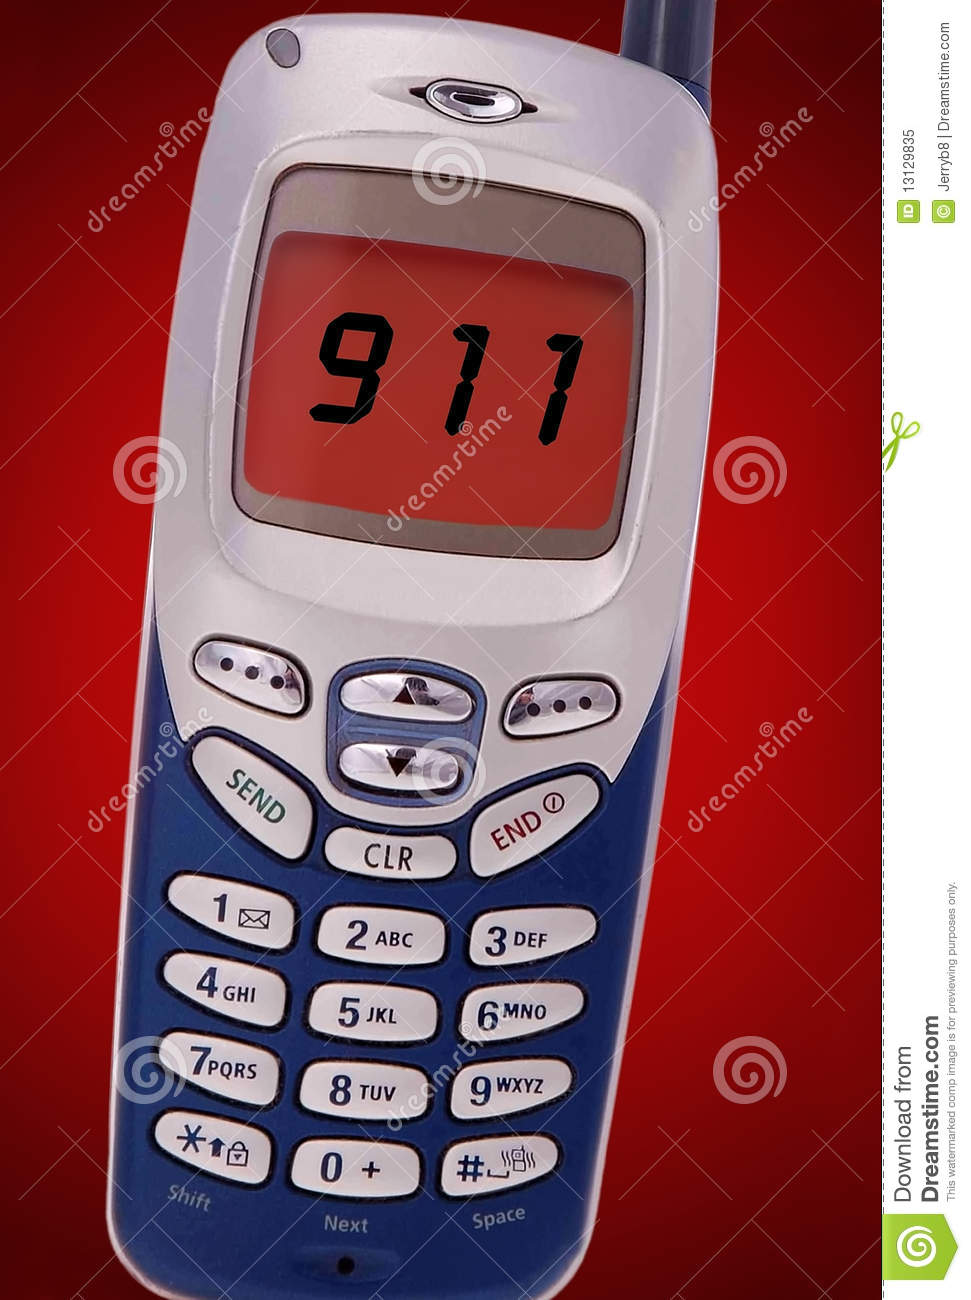 911 Call On Cell Phone Royalty Free Stock Photo   Image  13129835